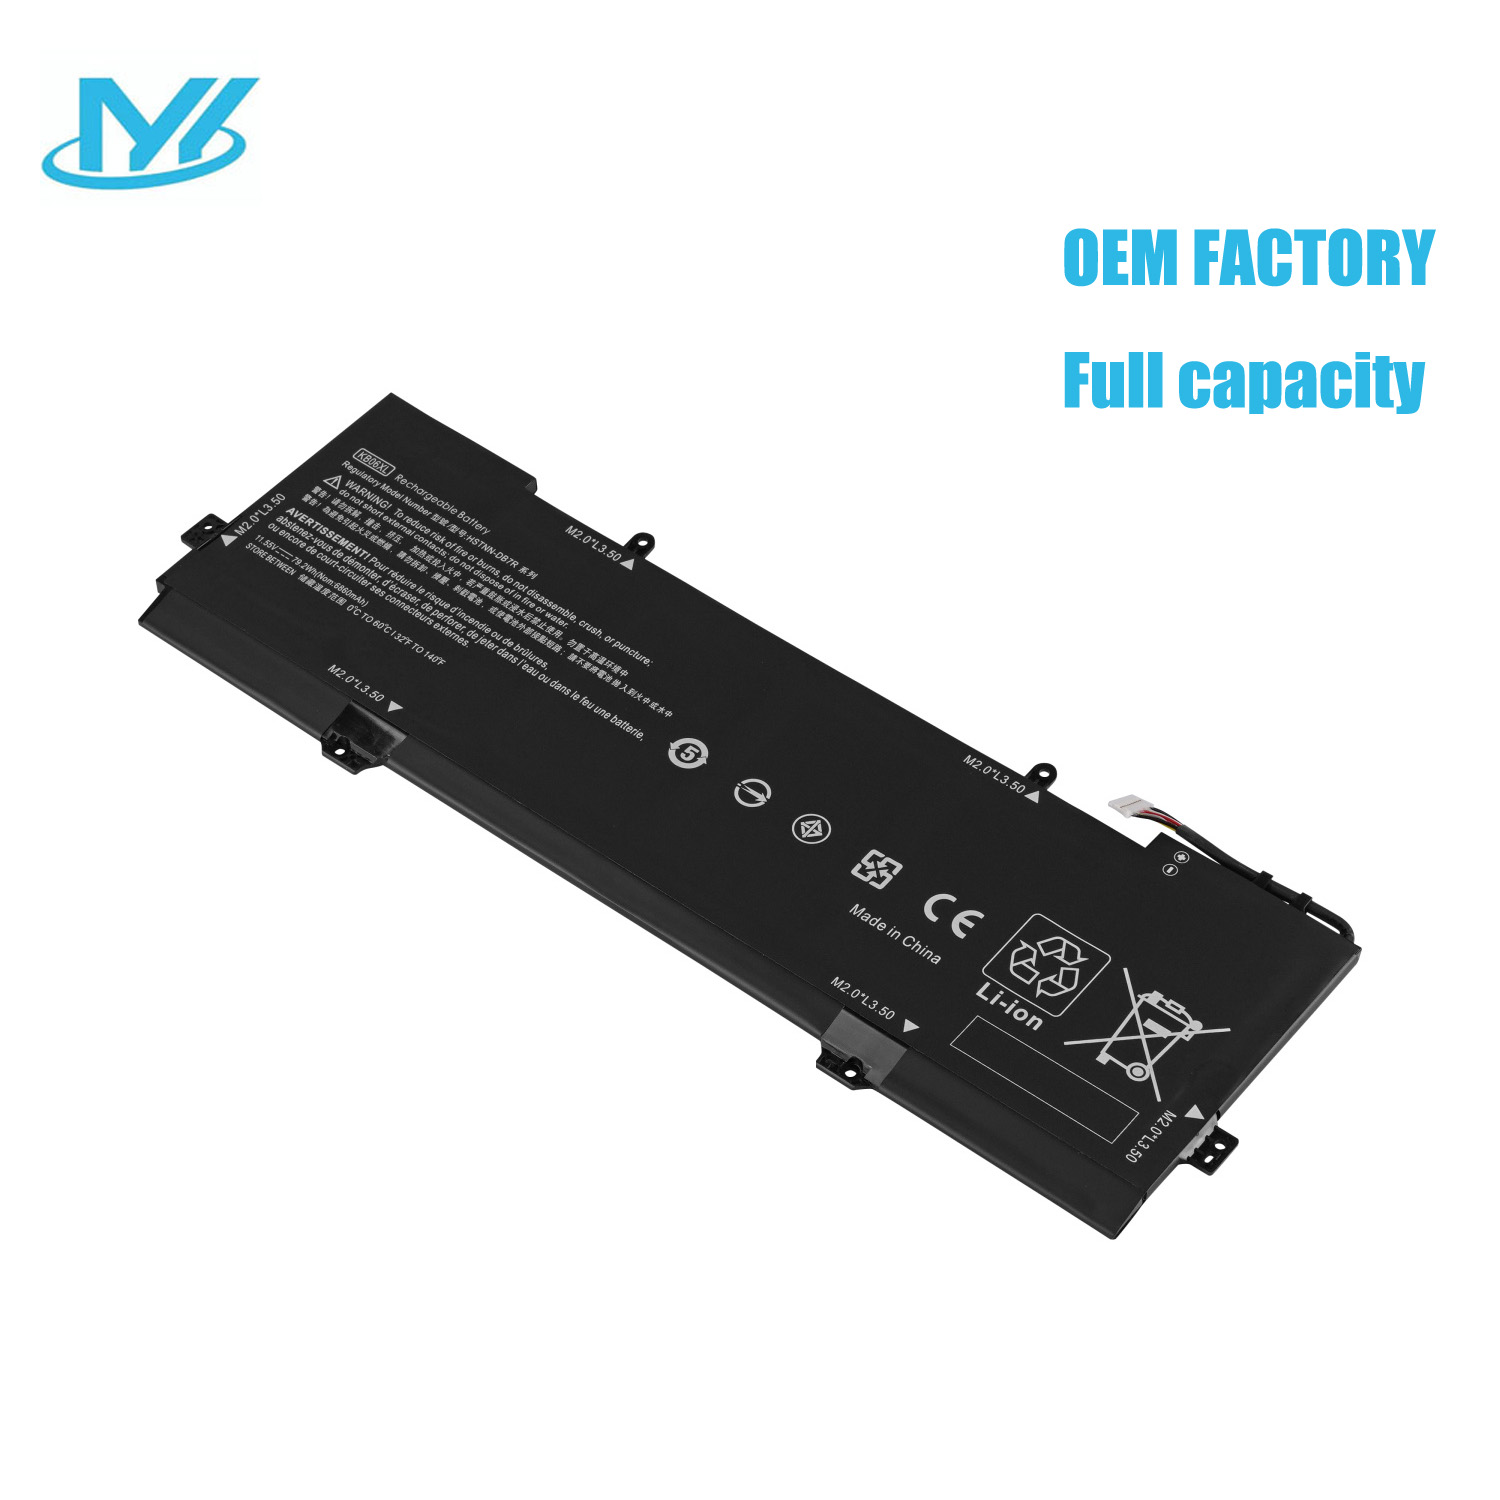 KB06XL rechargeable lithium ion Notebook battery Laptop battery for HP Spectre x360 15B HSTNN-DB7R Battery 11.55V 79.2Wh 6860mAh 6cell